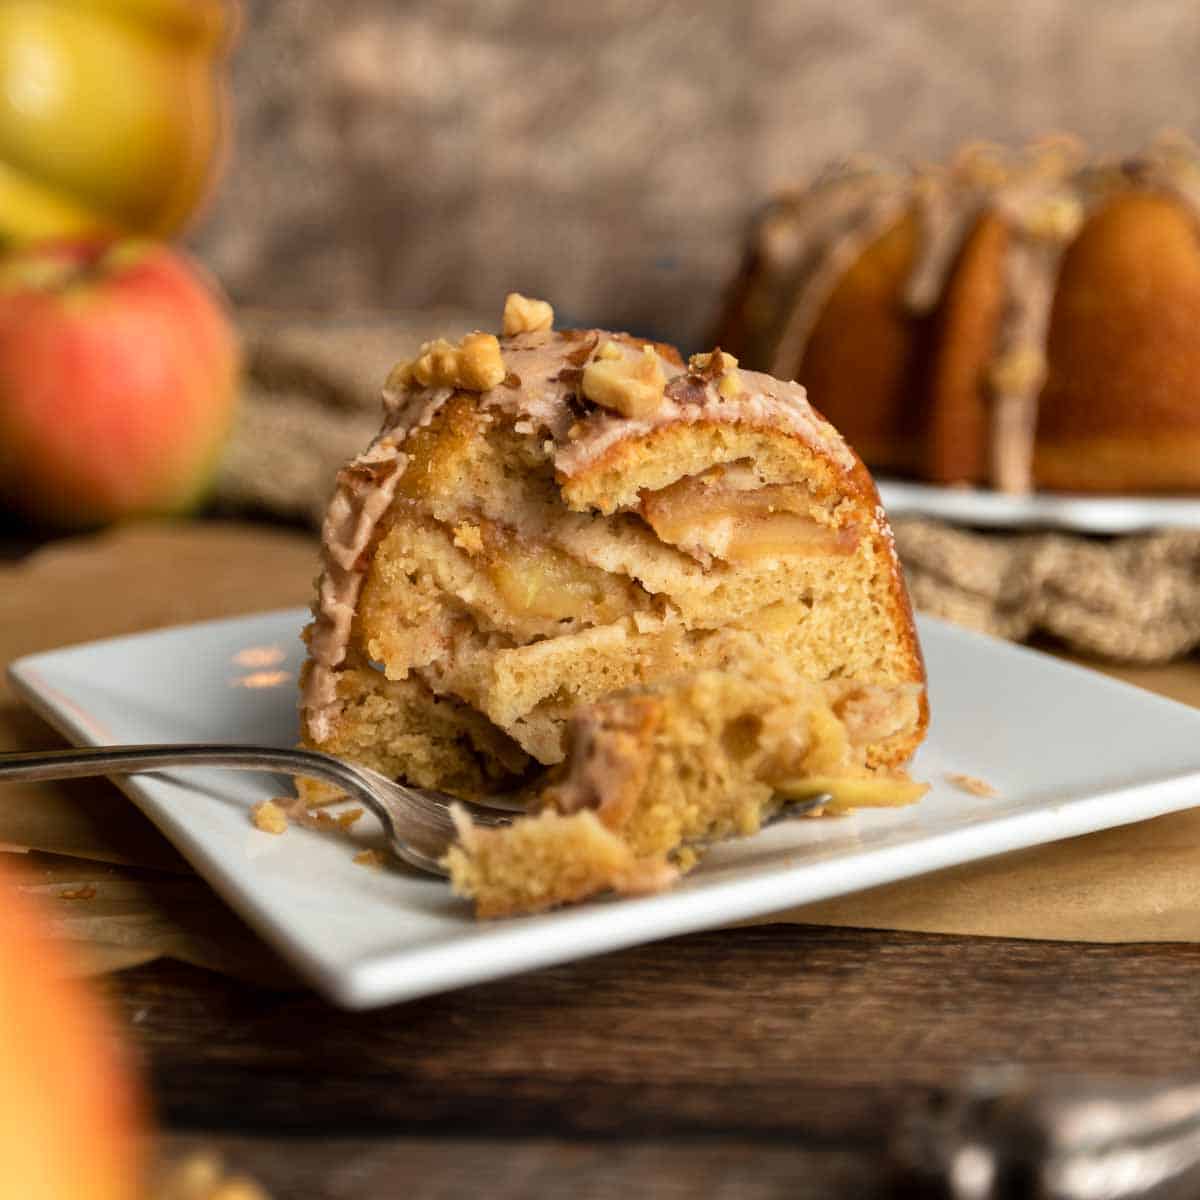 A slice of apple cake and a big forkful